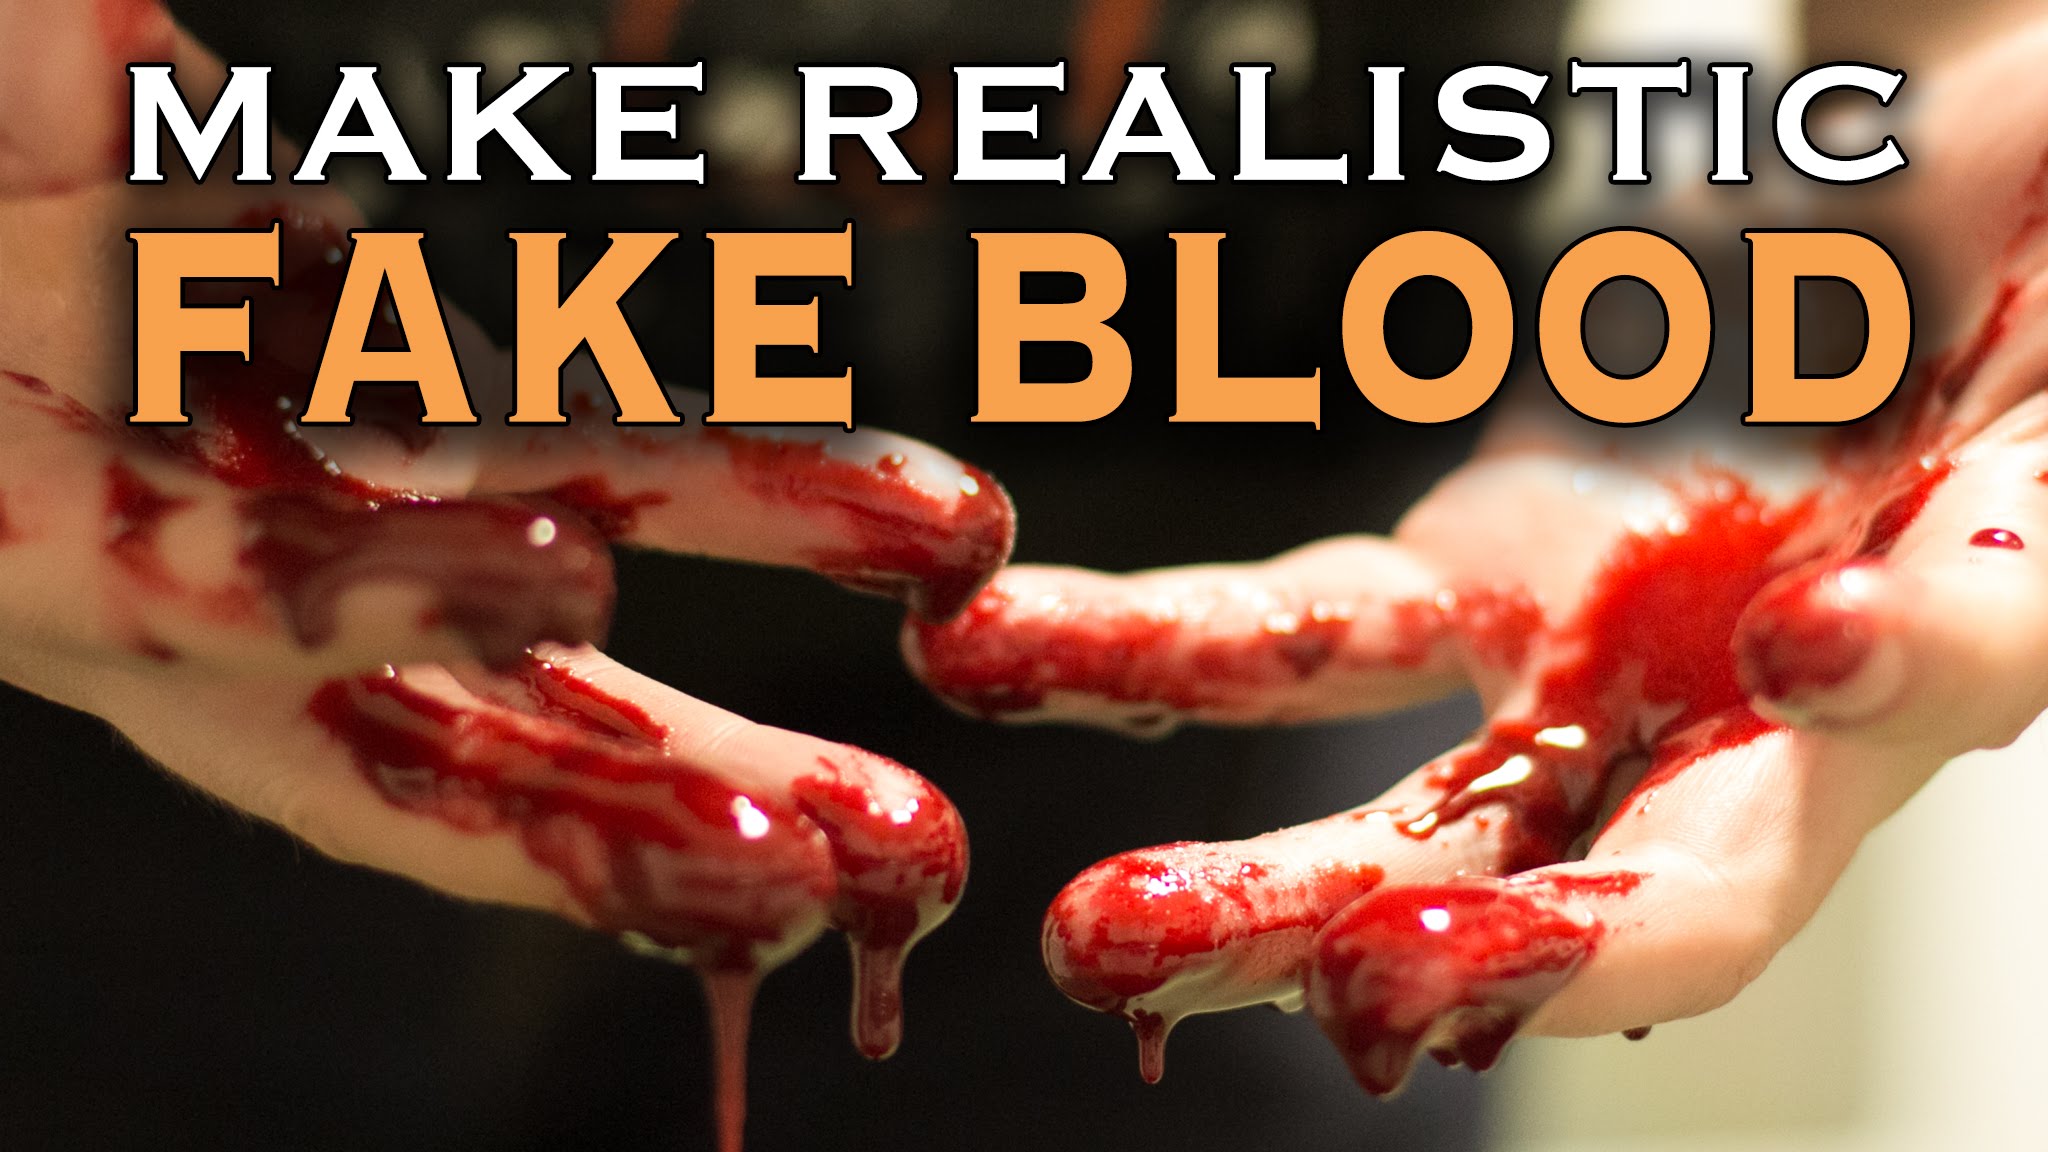 Make Realistic Fake Blood in 60 Seconds - YouTube